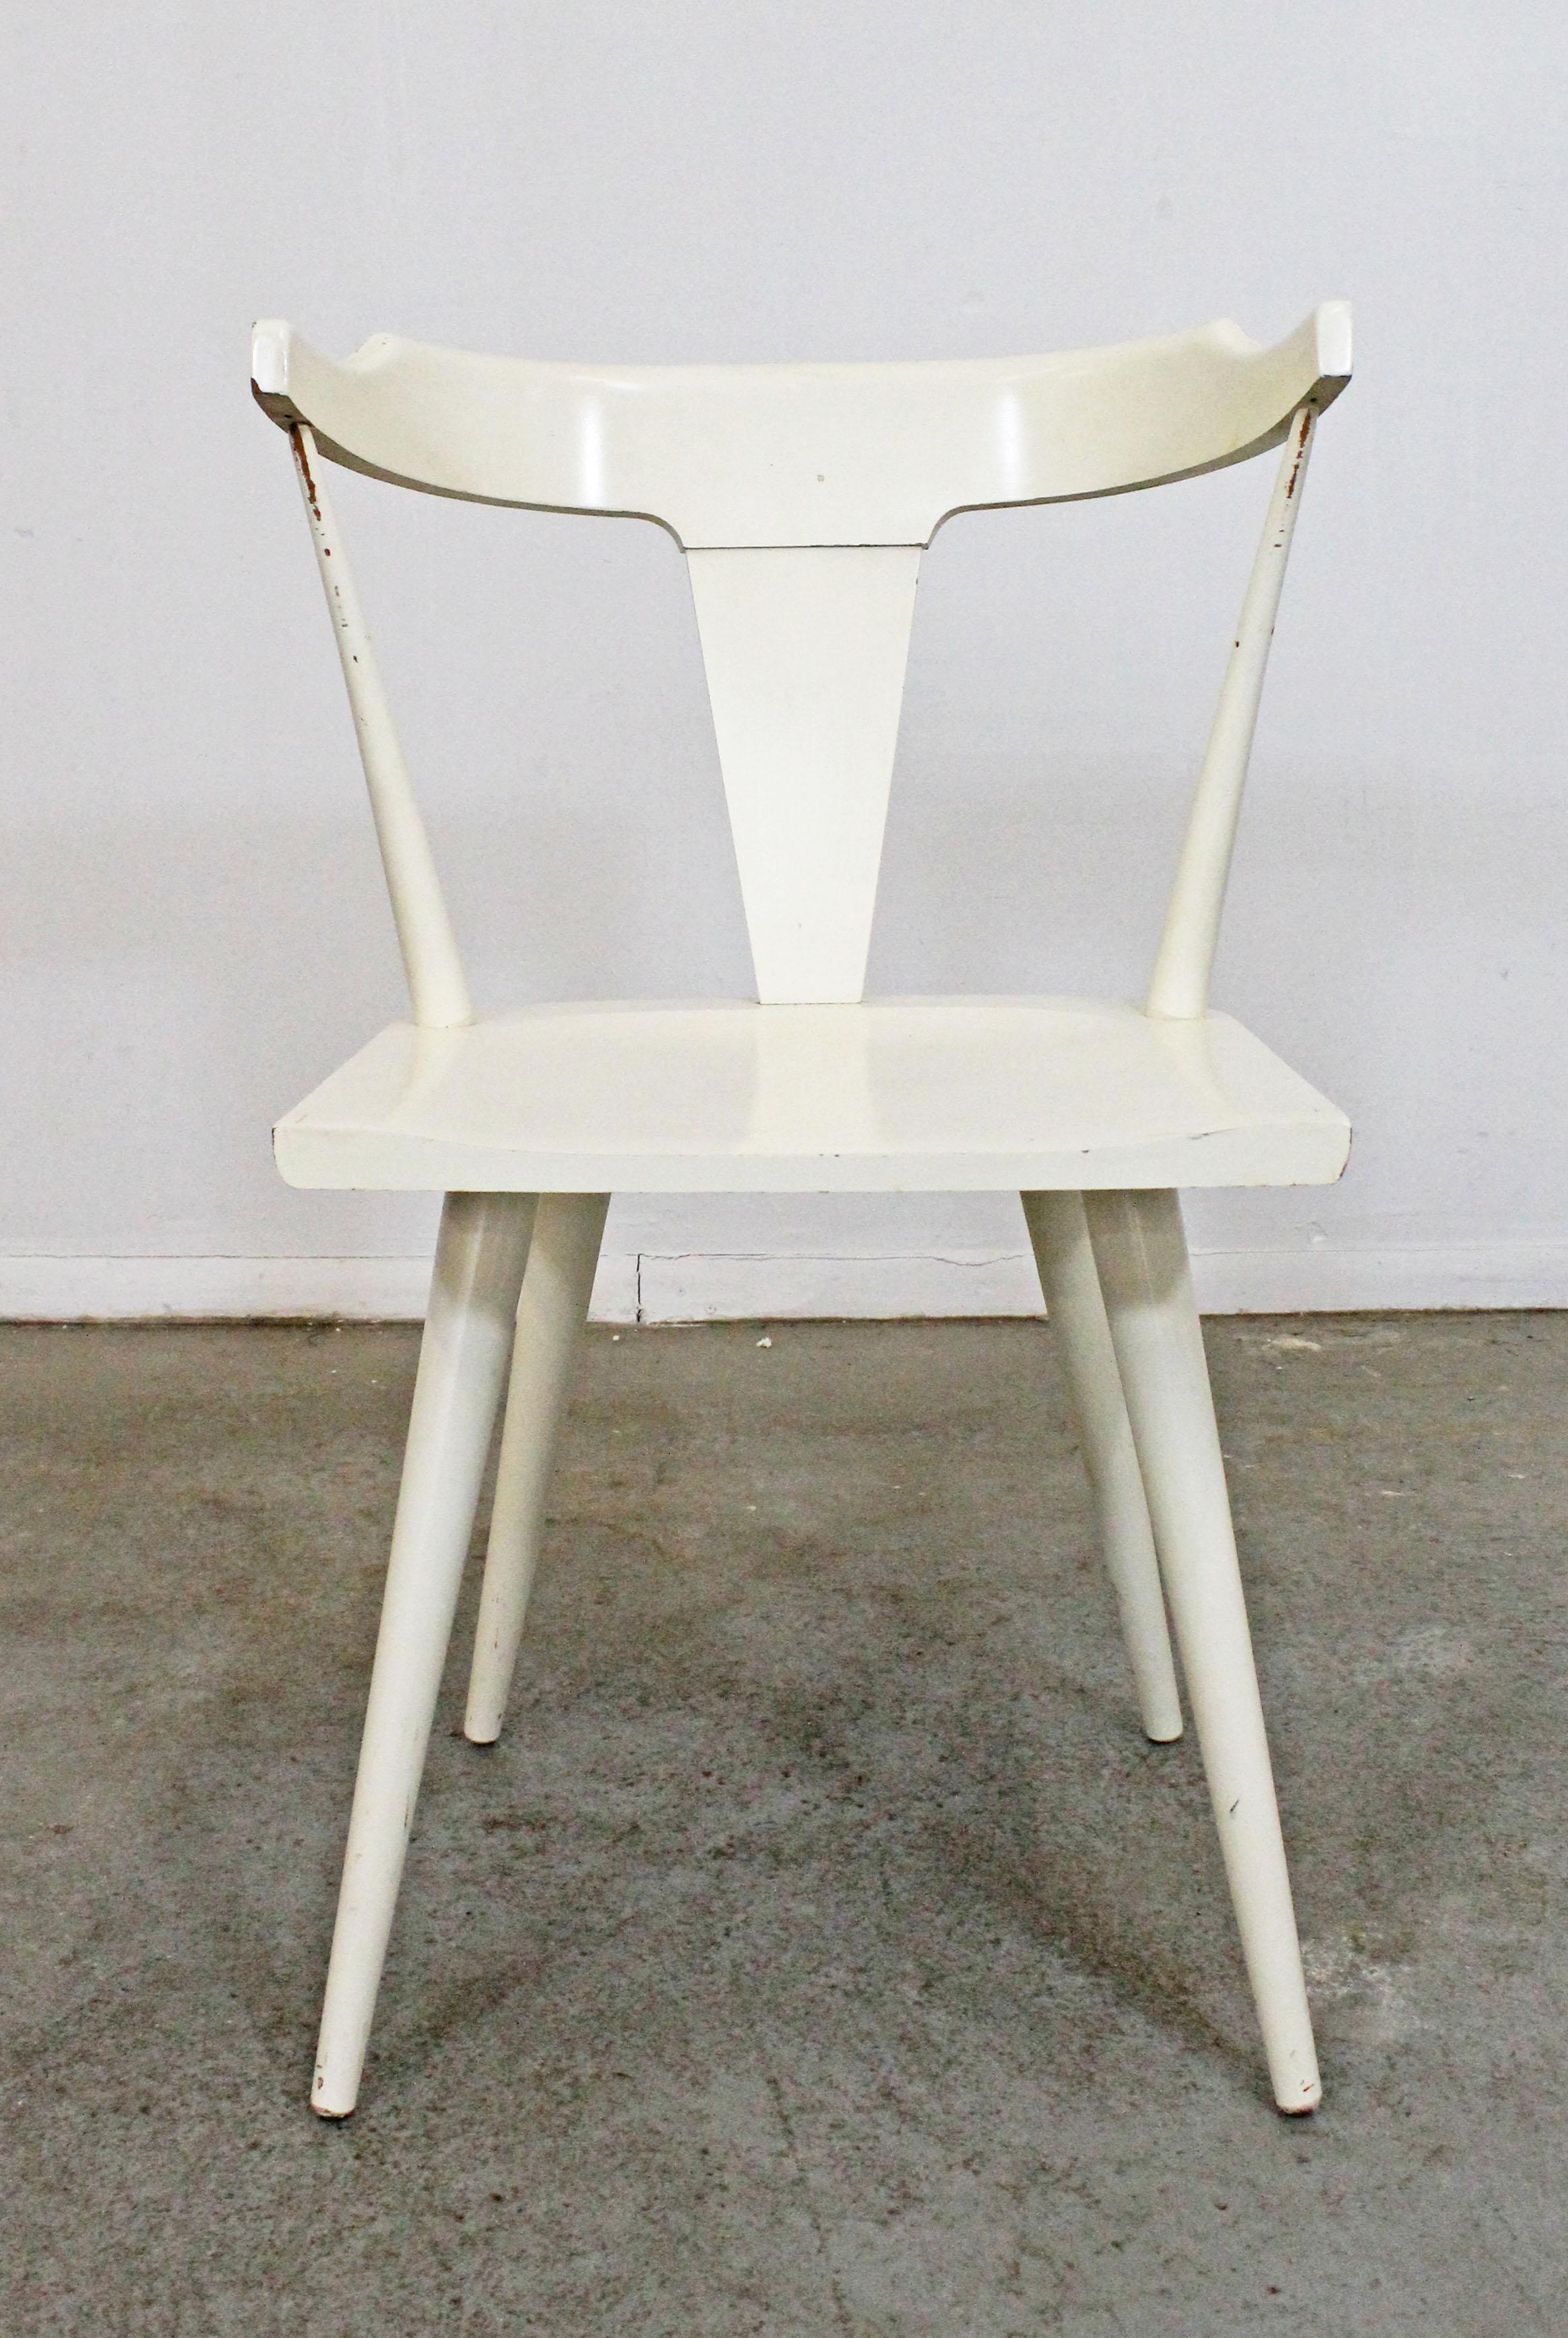 Offered is a vintage side chair designed by Paul McCobb for Planner Group. It is in good condition with some age wear including paint chips, surface scratches, and slight stains. We believe it was painted by its previous owner. It is marked by Paul